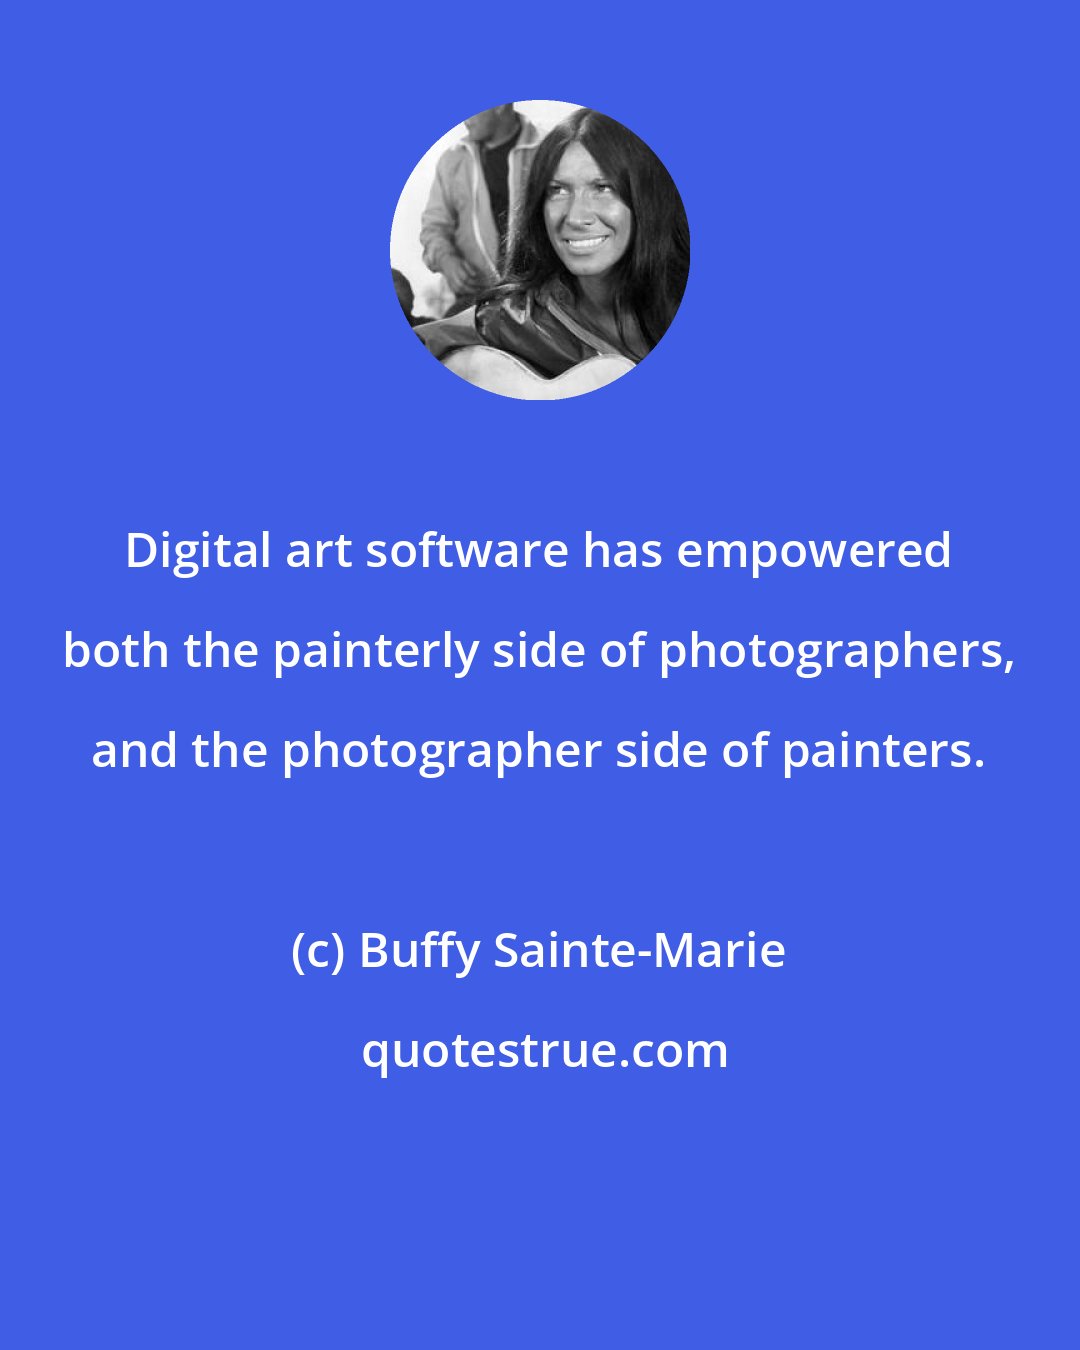 Buffy Sainte-Marie: Digital art software has empowered both the painterly side of photographers, and the photographer side of painters.